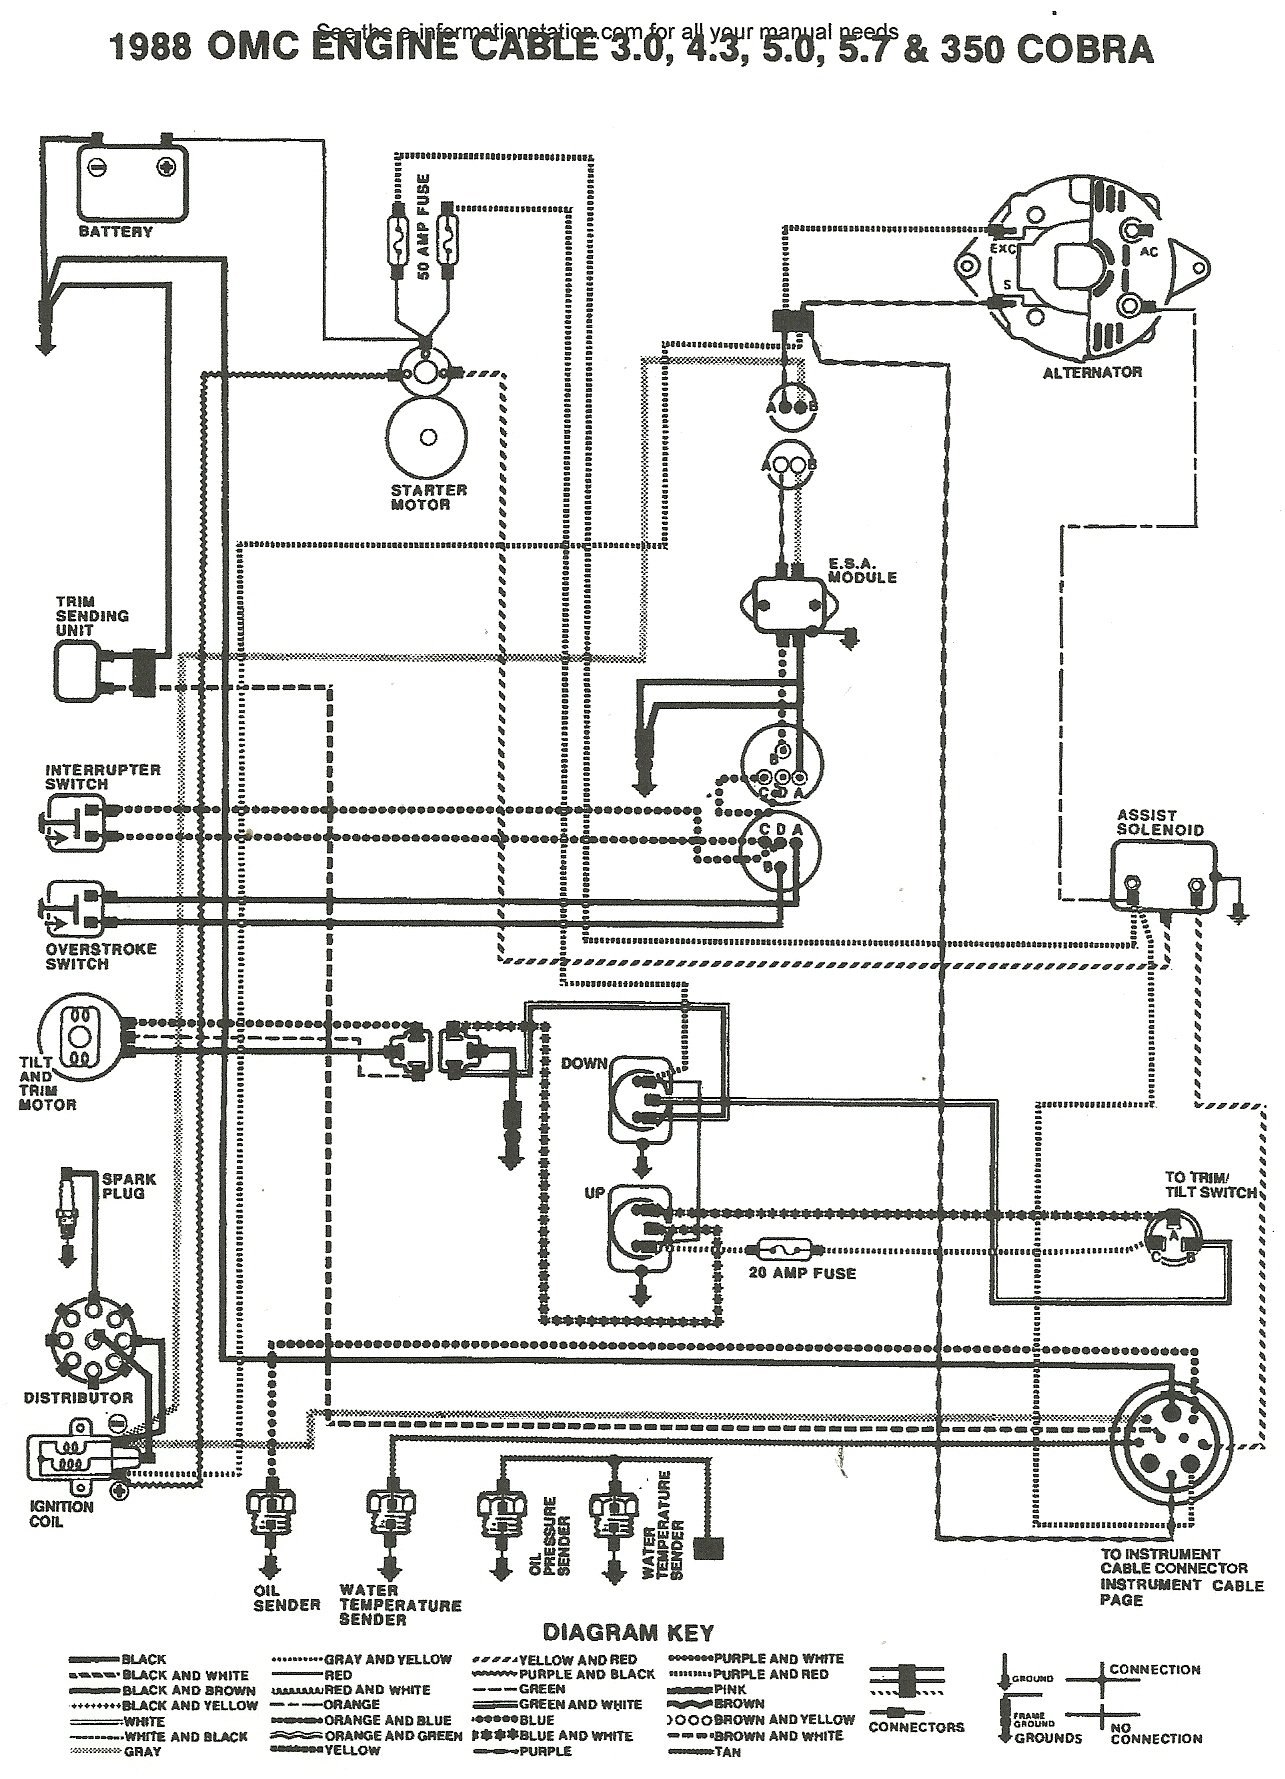 Bayliner Wiring Diagram from wiringall.com